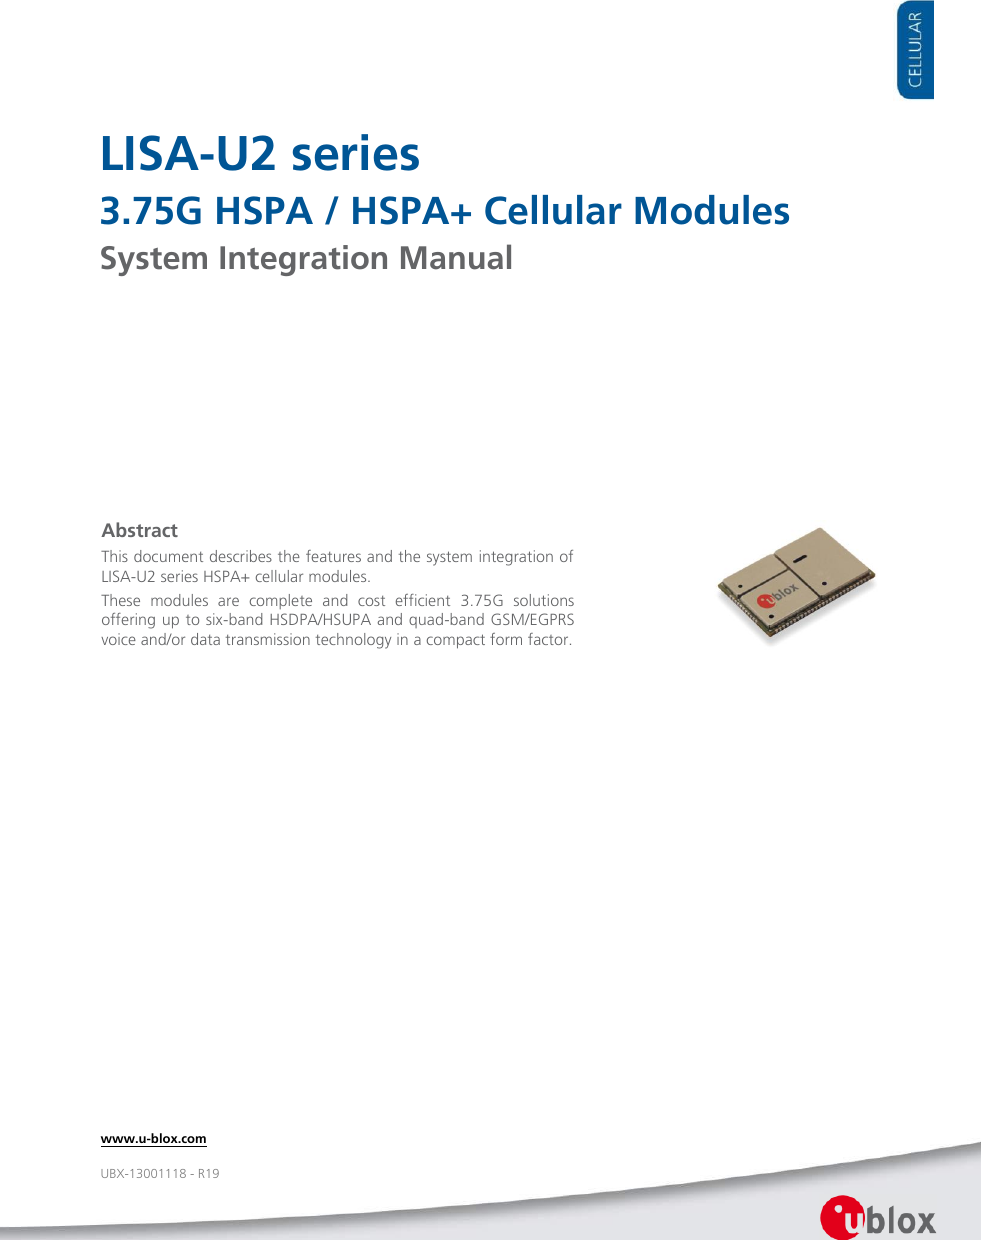     LISA-U2 series 3.75G HSPA / HSPA+ Cellular Modules System Integration Manual                   Abstract This document describes the features and the system integration of LISA-U2 series HSPA+ cellular modules. These  modules  are  complete  and  cost  efficient  3.75G  solutions offering up to six-band HSDPA/HSUPA and quad-band GSM/EGPRS voice and/or data transmission technology in a compact form factor.  www.u-blox.com UBX-13001118 - R19 